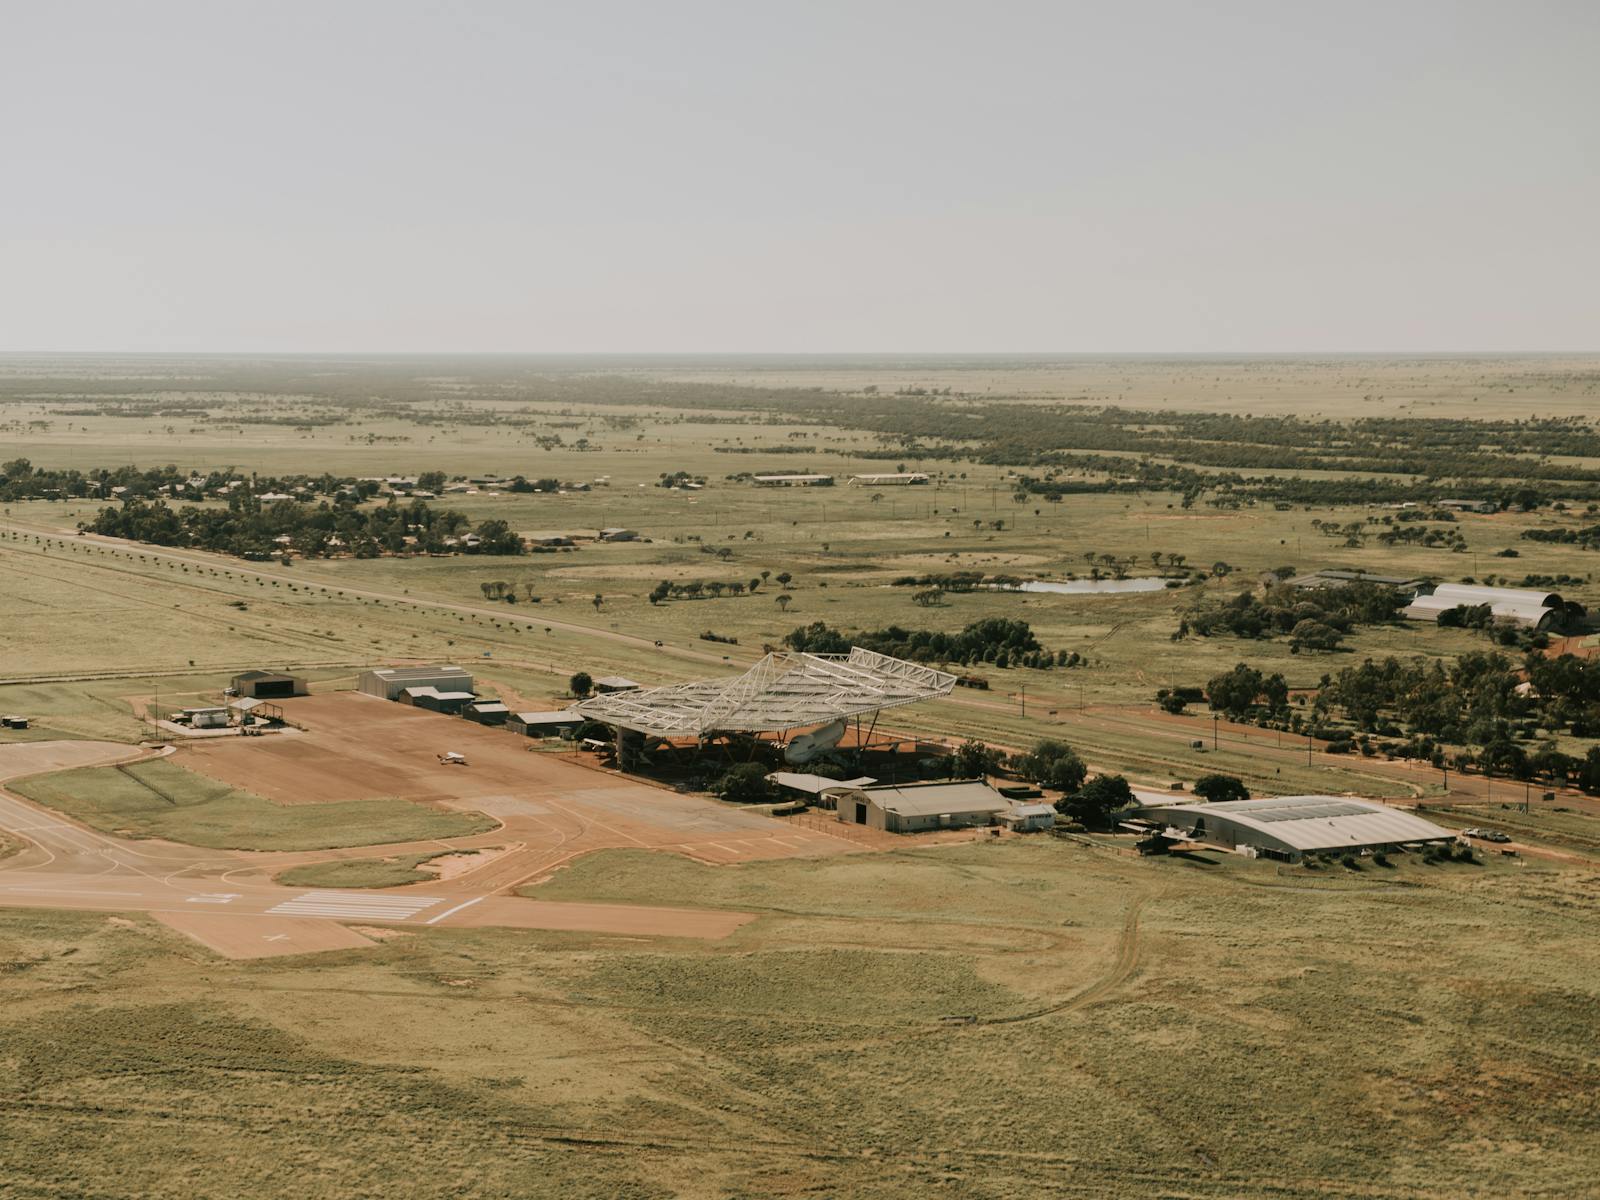 QANTAS founders museum from above while on our Longreach legends scenic flight